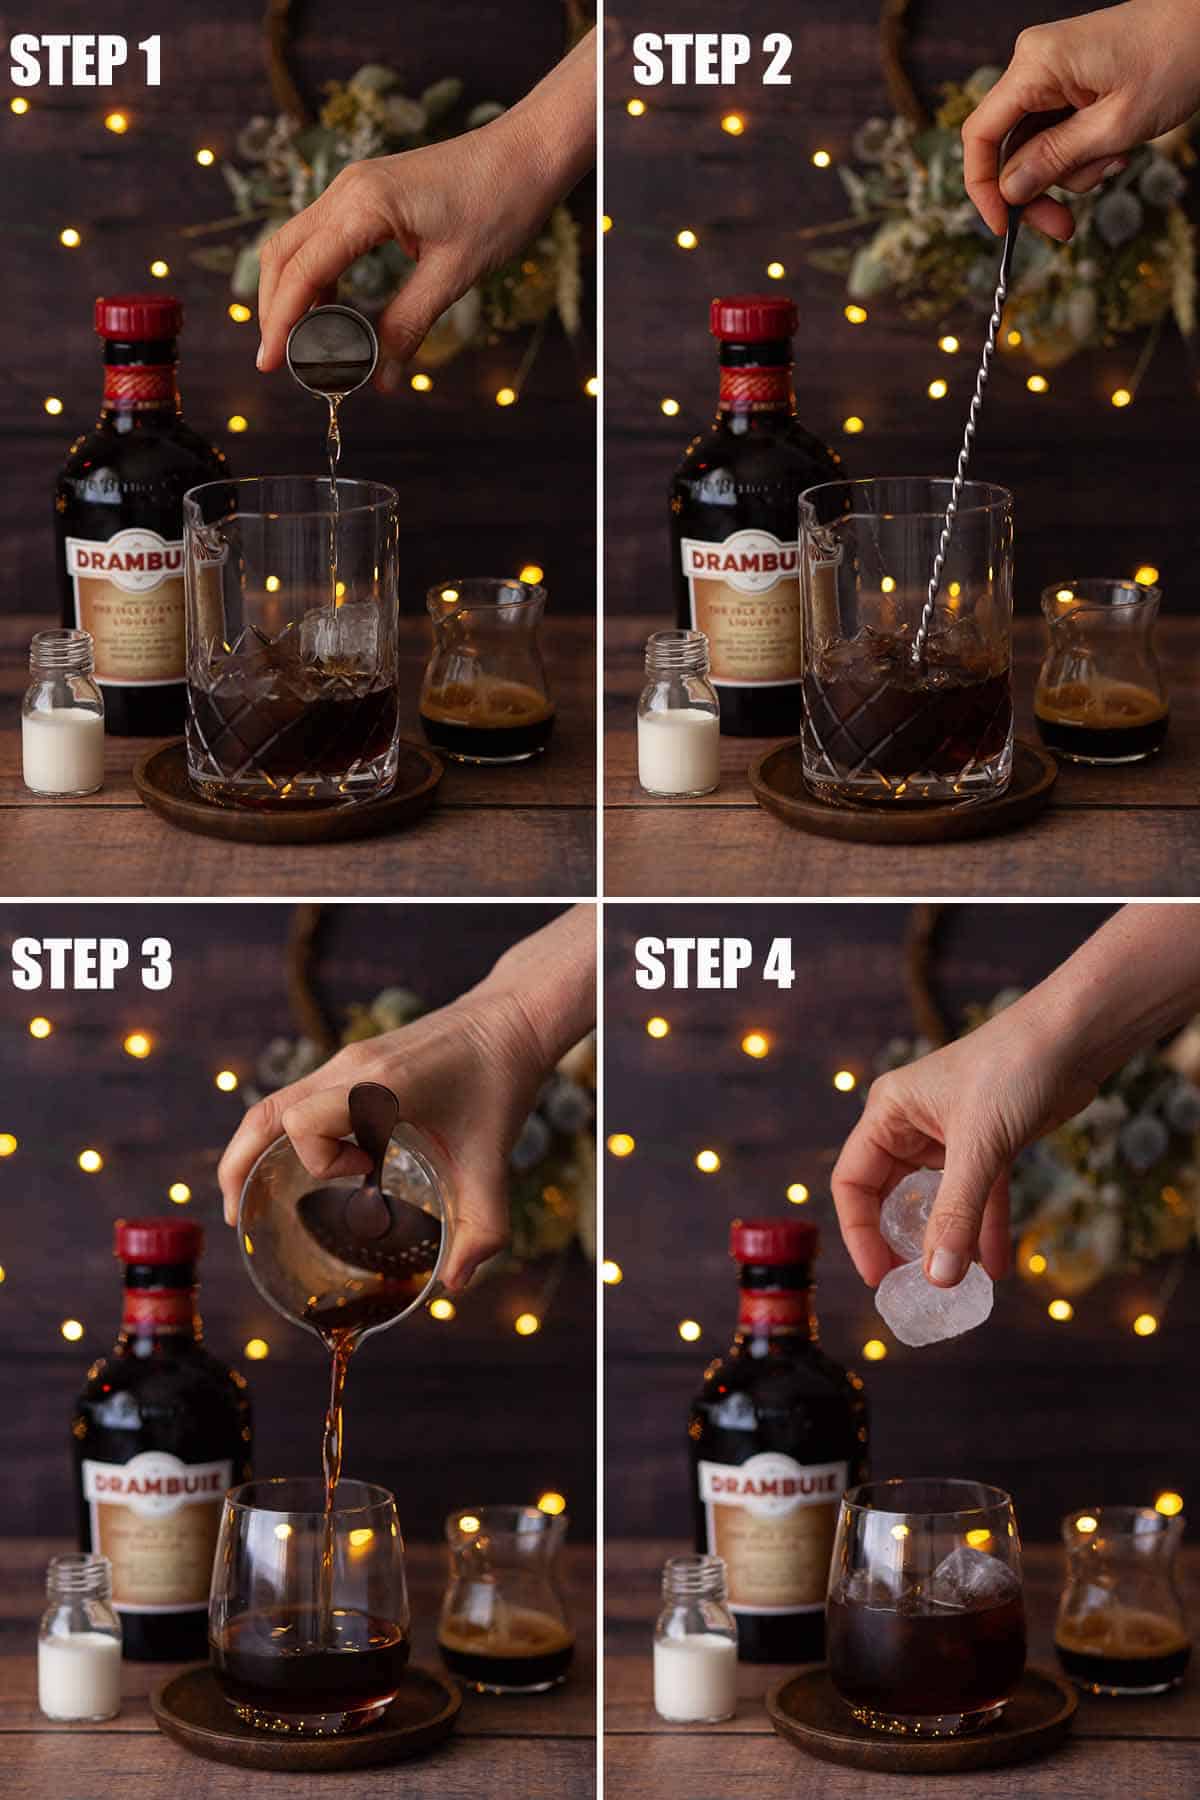 Collage of images showing an alcoholic drink being made.